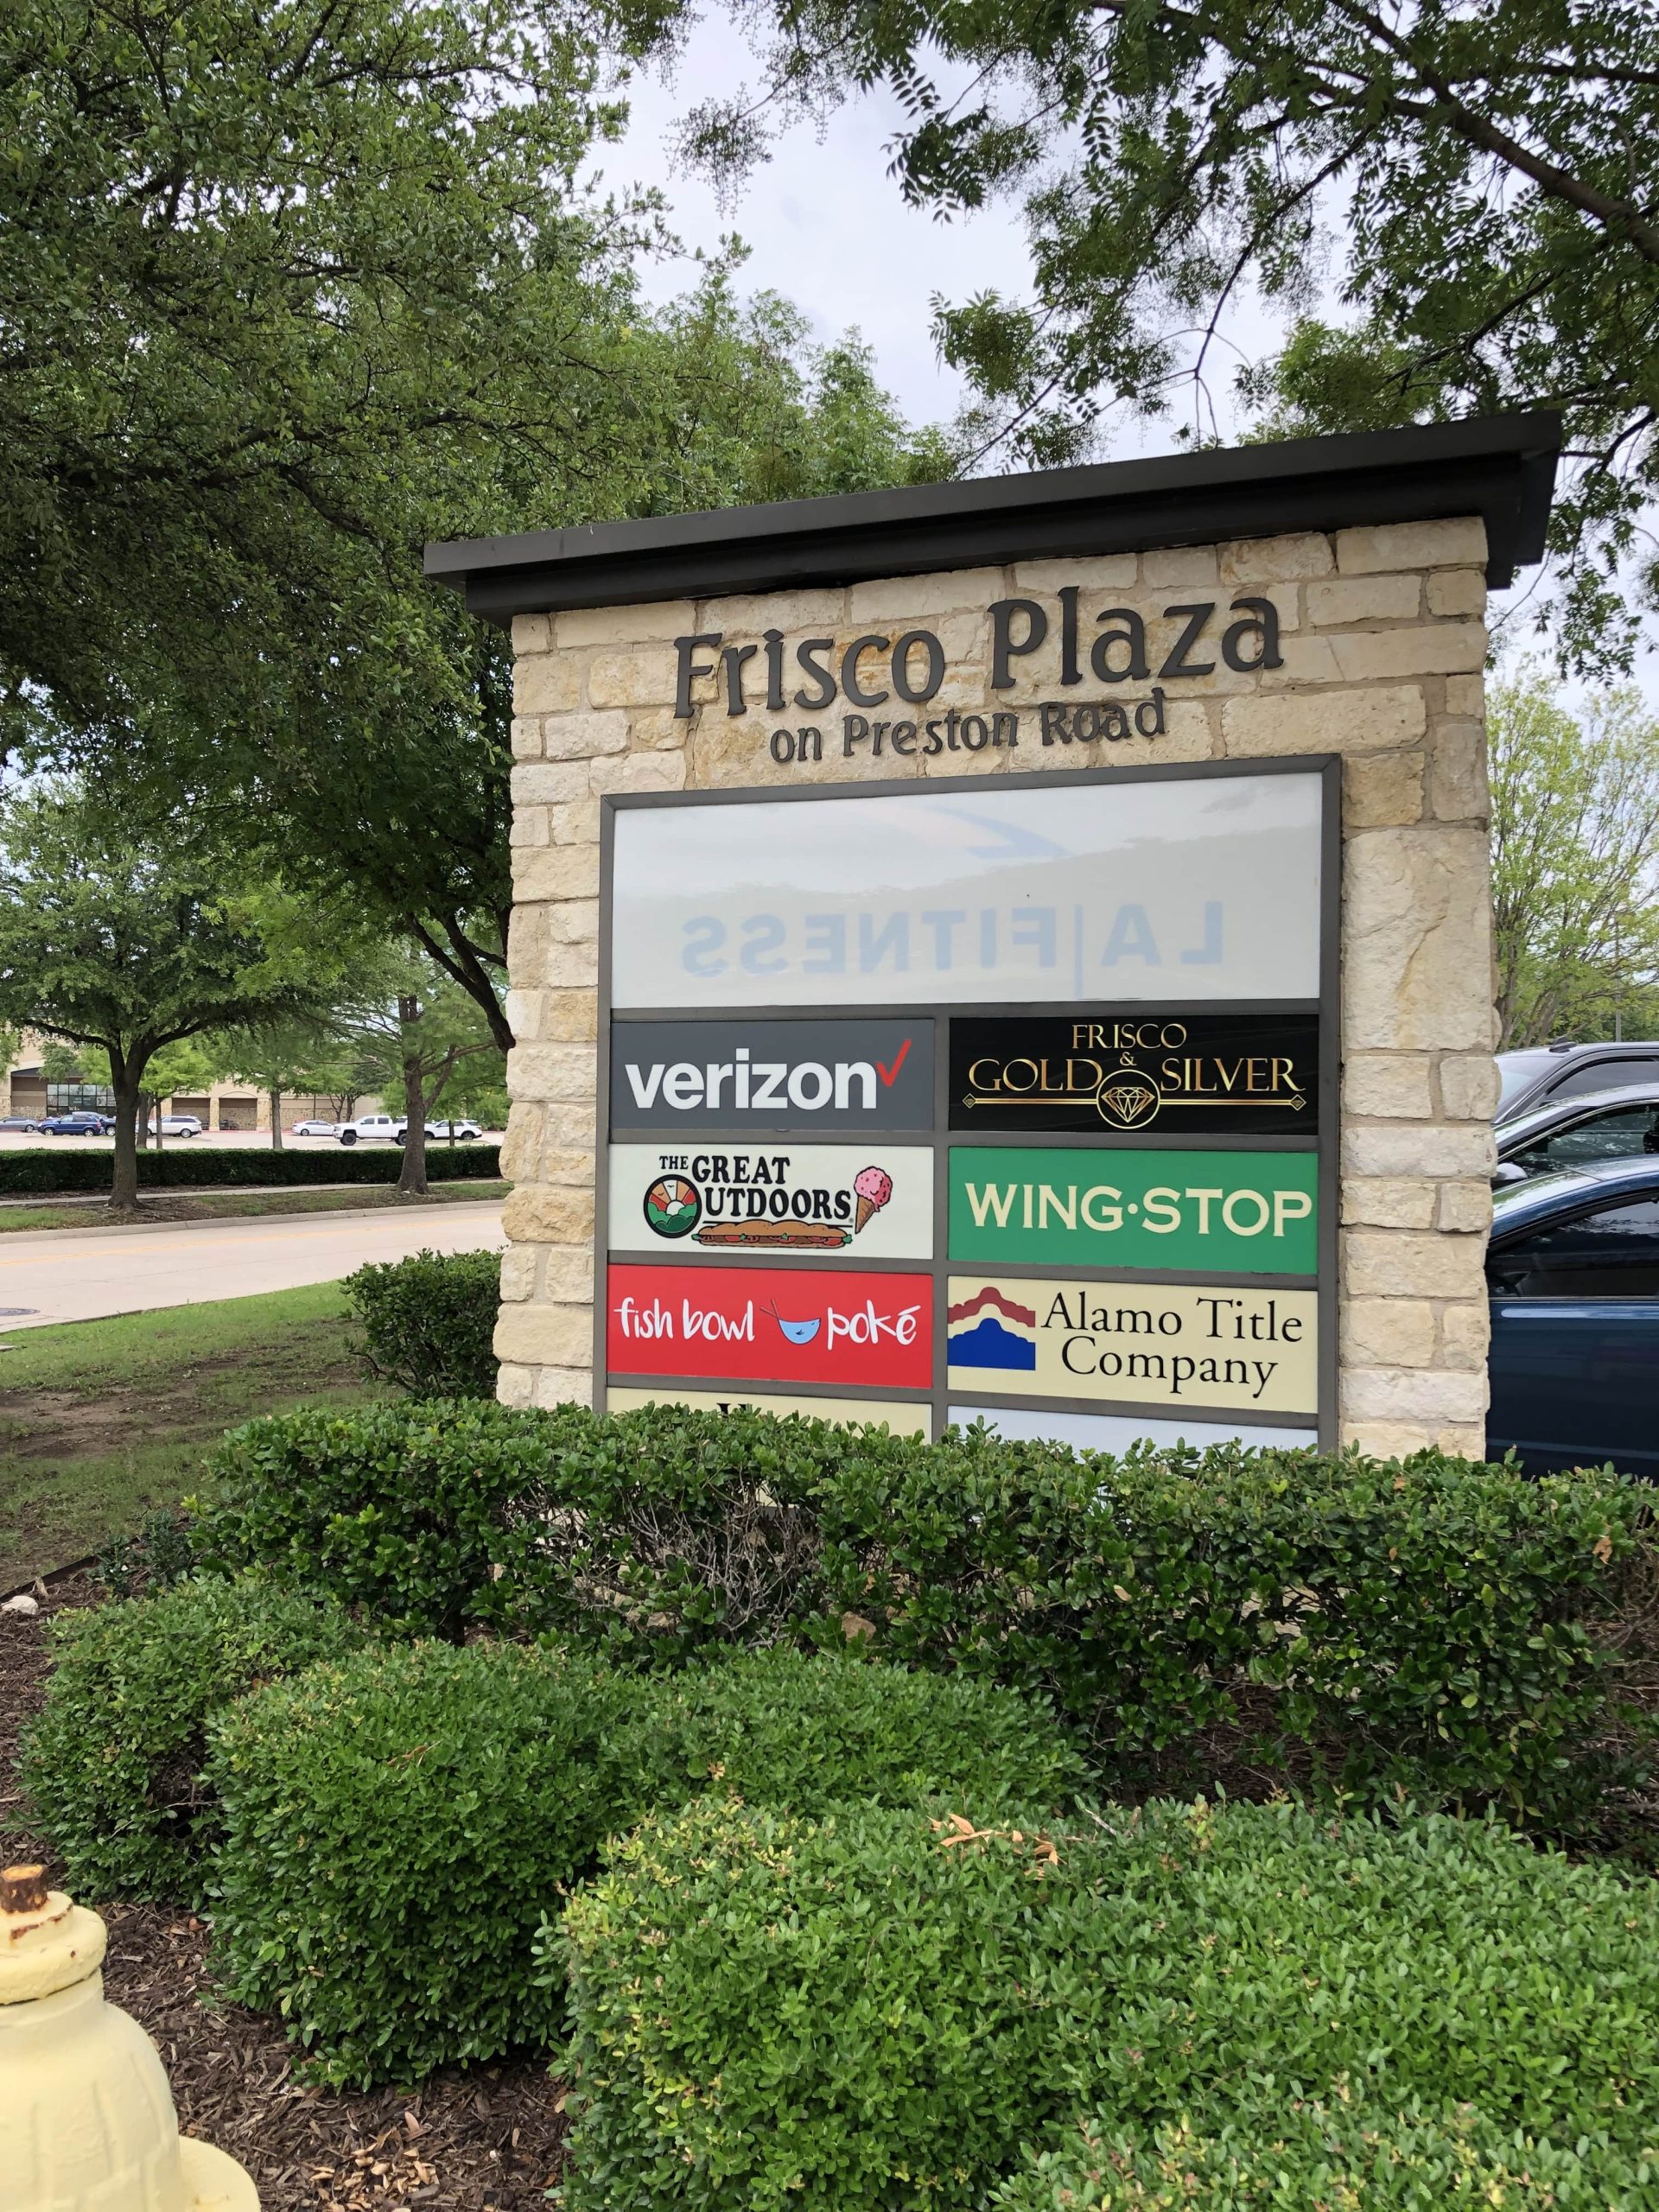 Outdoor monument sign of Frisco Plaza on Preston road